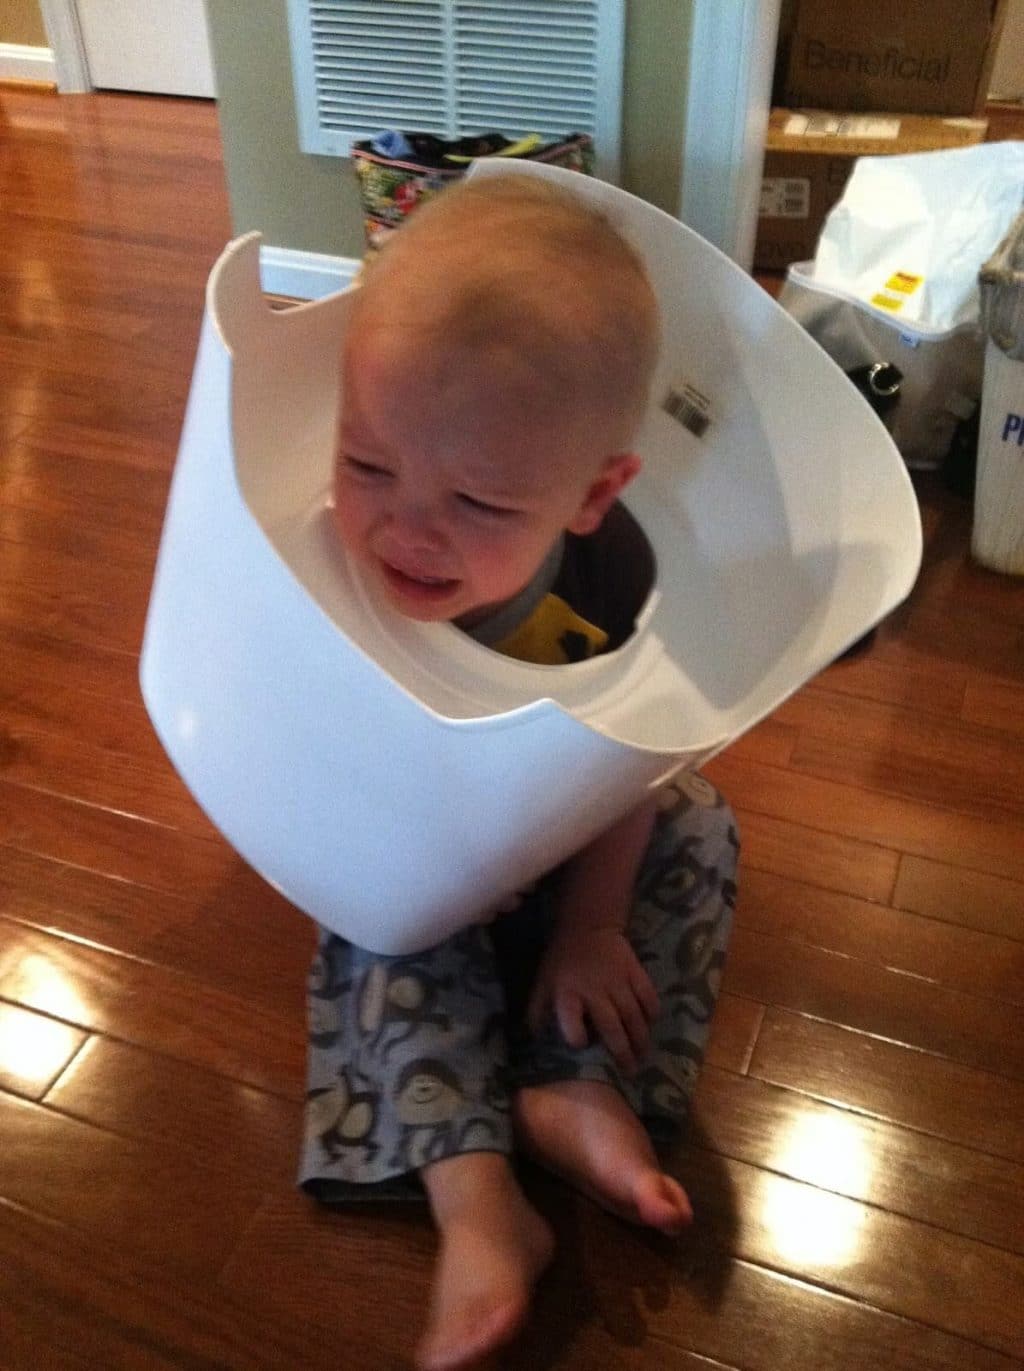 Arizona boy gets his head stuck in his toilet seat | Daily 